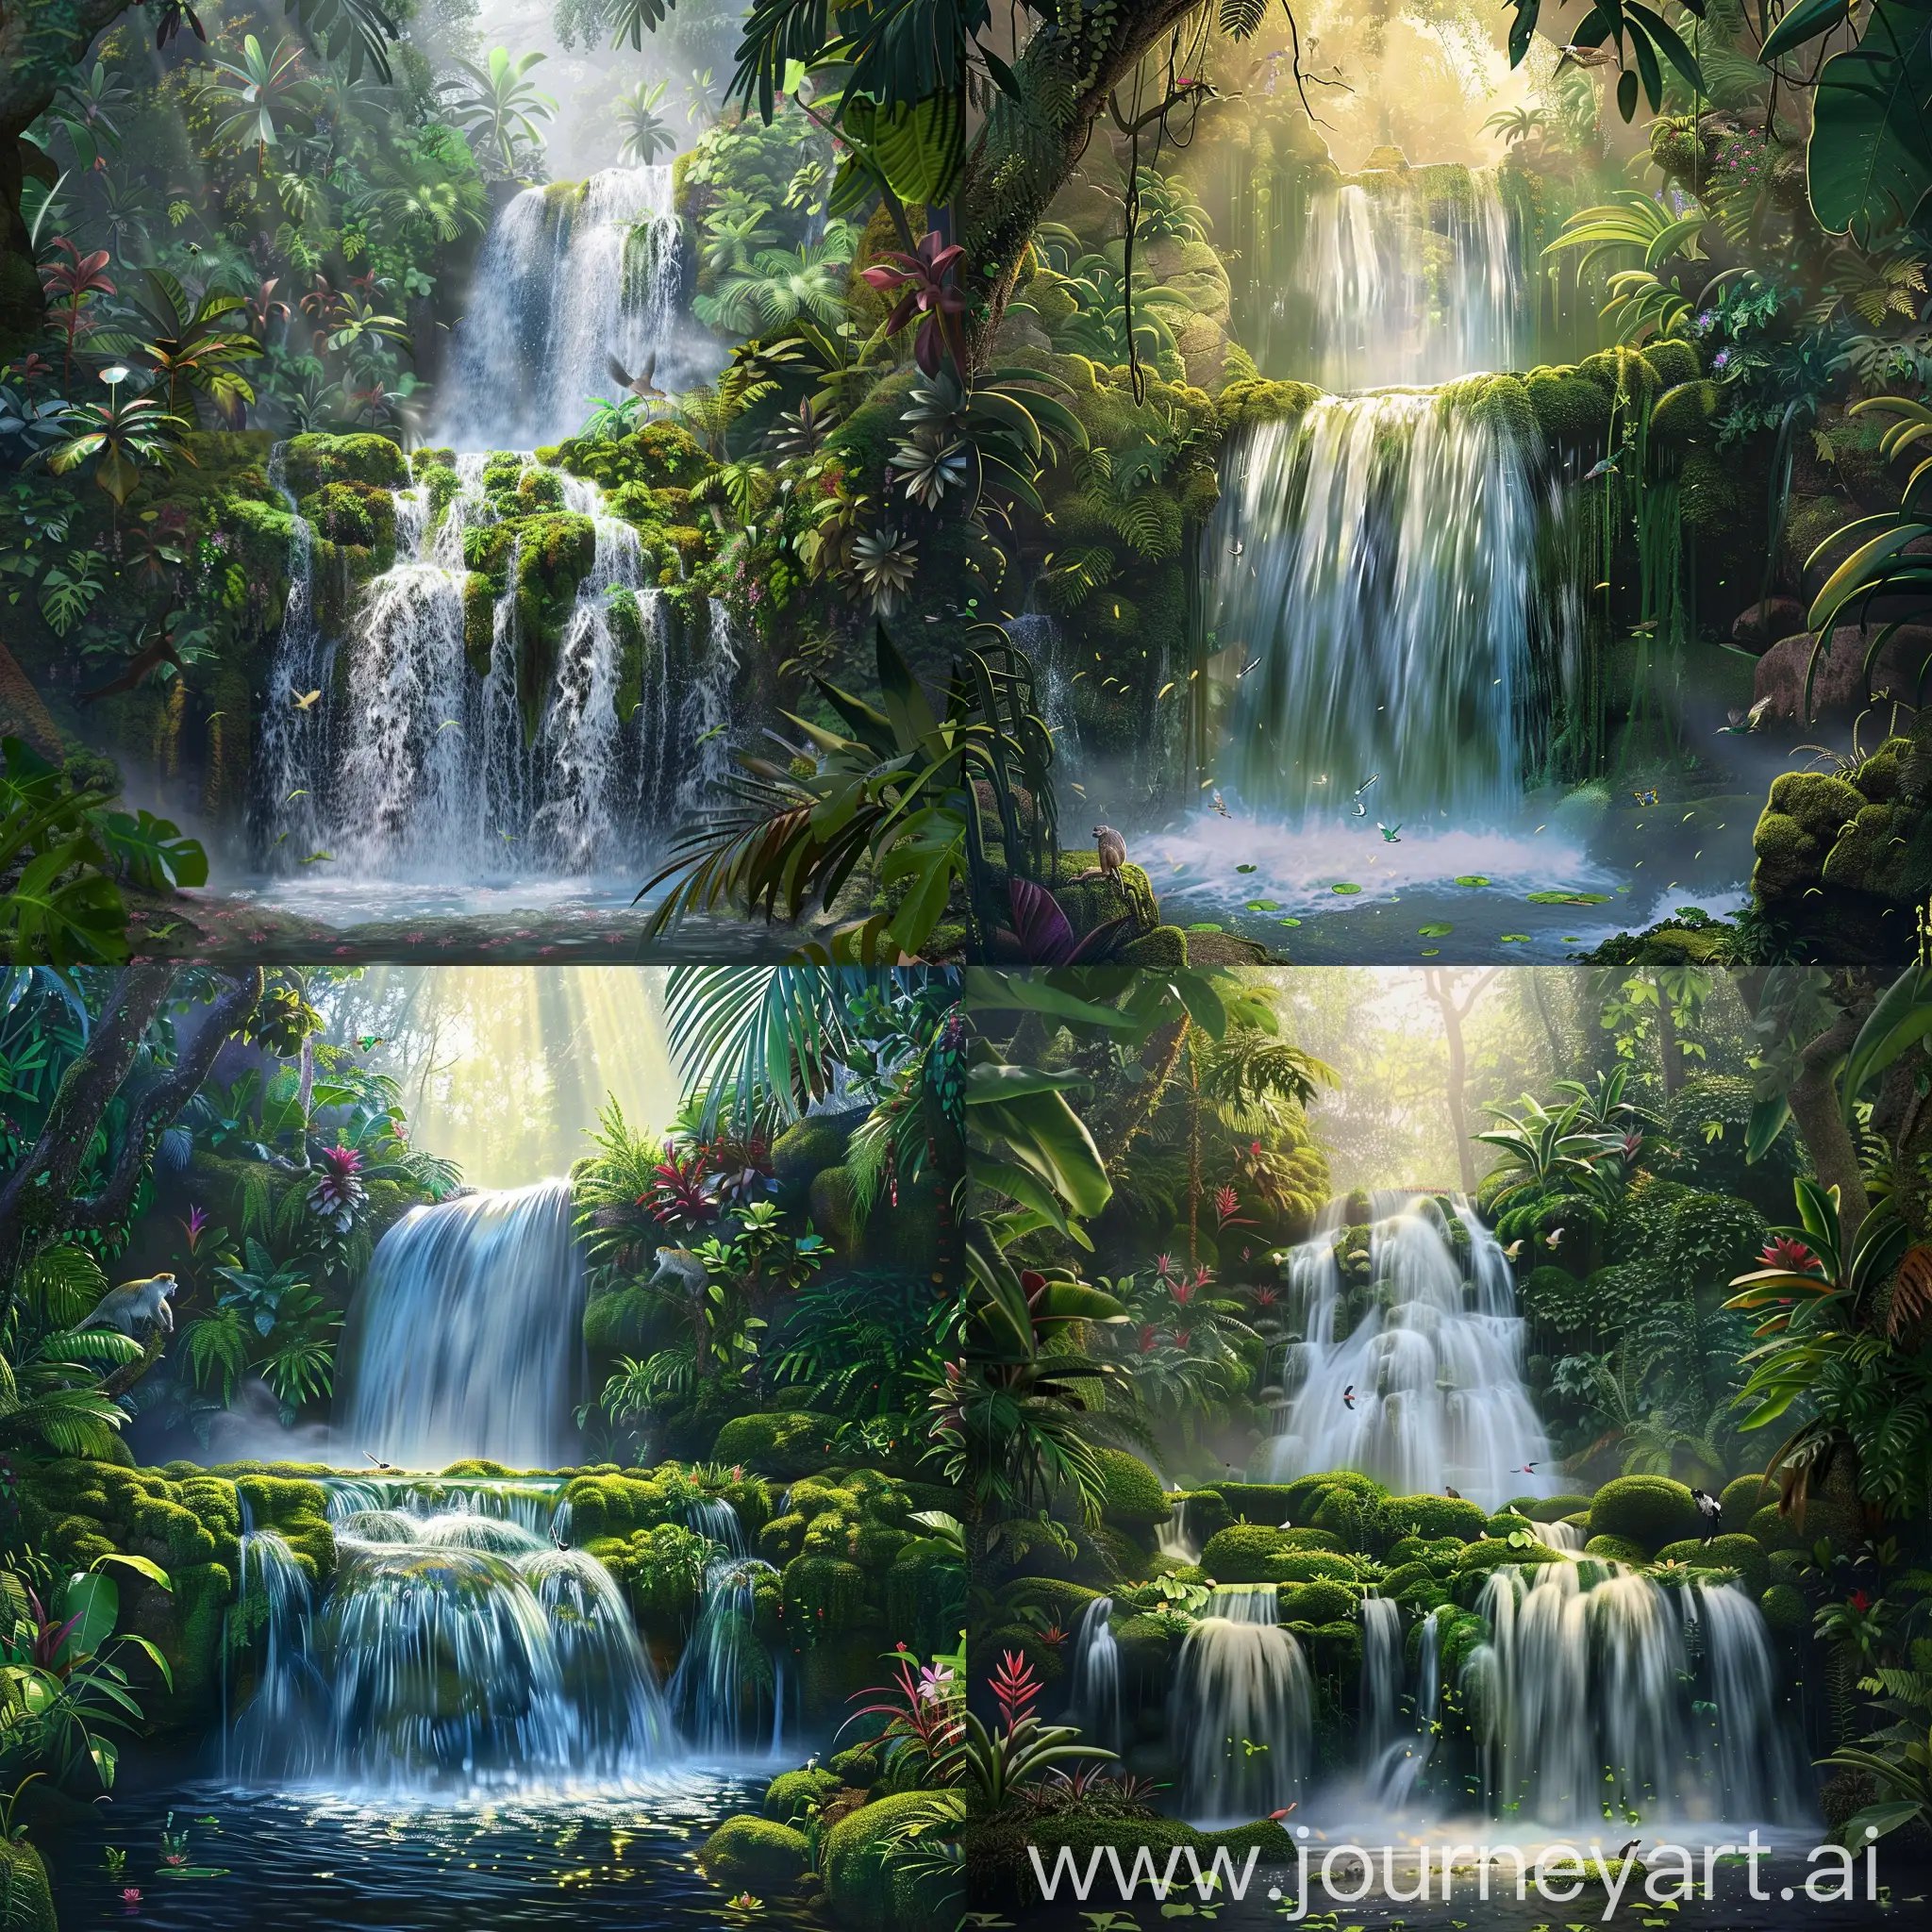 "Design a stunning and immersive jungle waterfall scene that embodies tranquility and the beauty of nature for a desktop wallpaper. The waterfall should be the central focal point, cascading over mossy rocks with crystal-clear water that shimmers in the sunlight. The water should create a gentle mist as it falls into a serene pool below, surrounded by lush, vibrant tropical foliage of various shades of green. Include exotic plants and flowers native to the jungle environment, enhancing the feeling of a tropical paradise.  The composition should be wide enough to fill a desktop screen without losing any of its detail when set as wallpaper. The top of the waterfall might disappear into the dense jungle canopy above, suggesting the grandeur and scale of the jungle's natural architecture. The lighting should be soft and diffused, with rays of sunlight breaking through the treetops to create a mystical atmosphere. Integrate subtle details such as birds in flight or a monkey observing from a tree branch to bring the scene to life. The overall effect should be one of a hidden oasis, captivating and peaceful, suitable for a desktop background that brings a sense of calm and inspiration to anyone who views it."